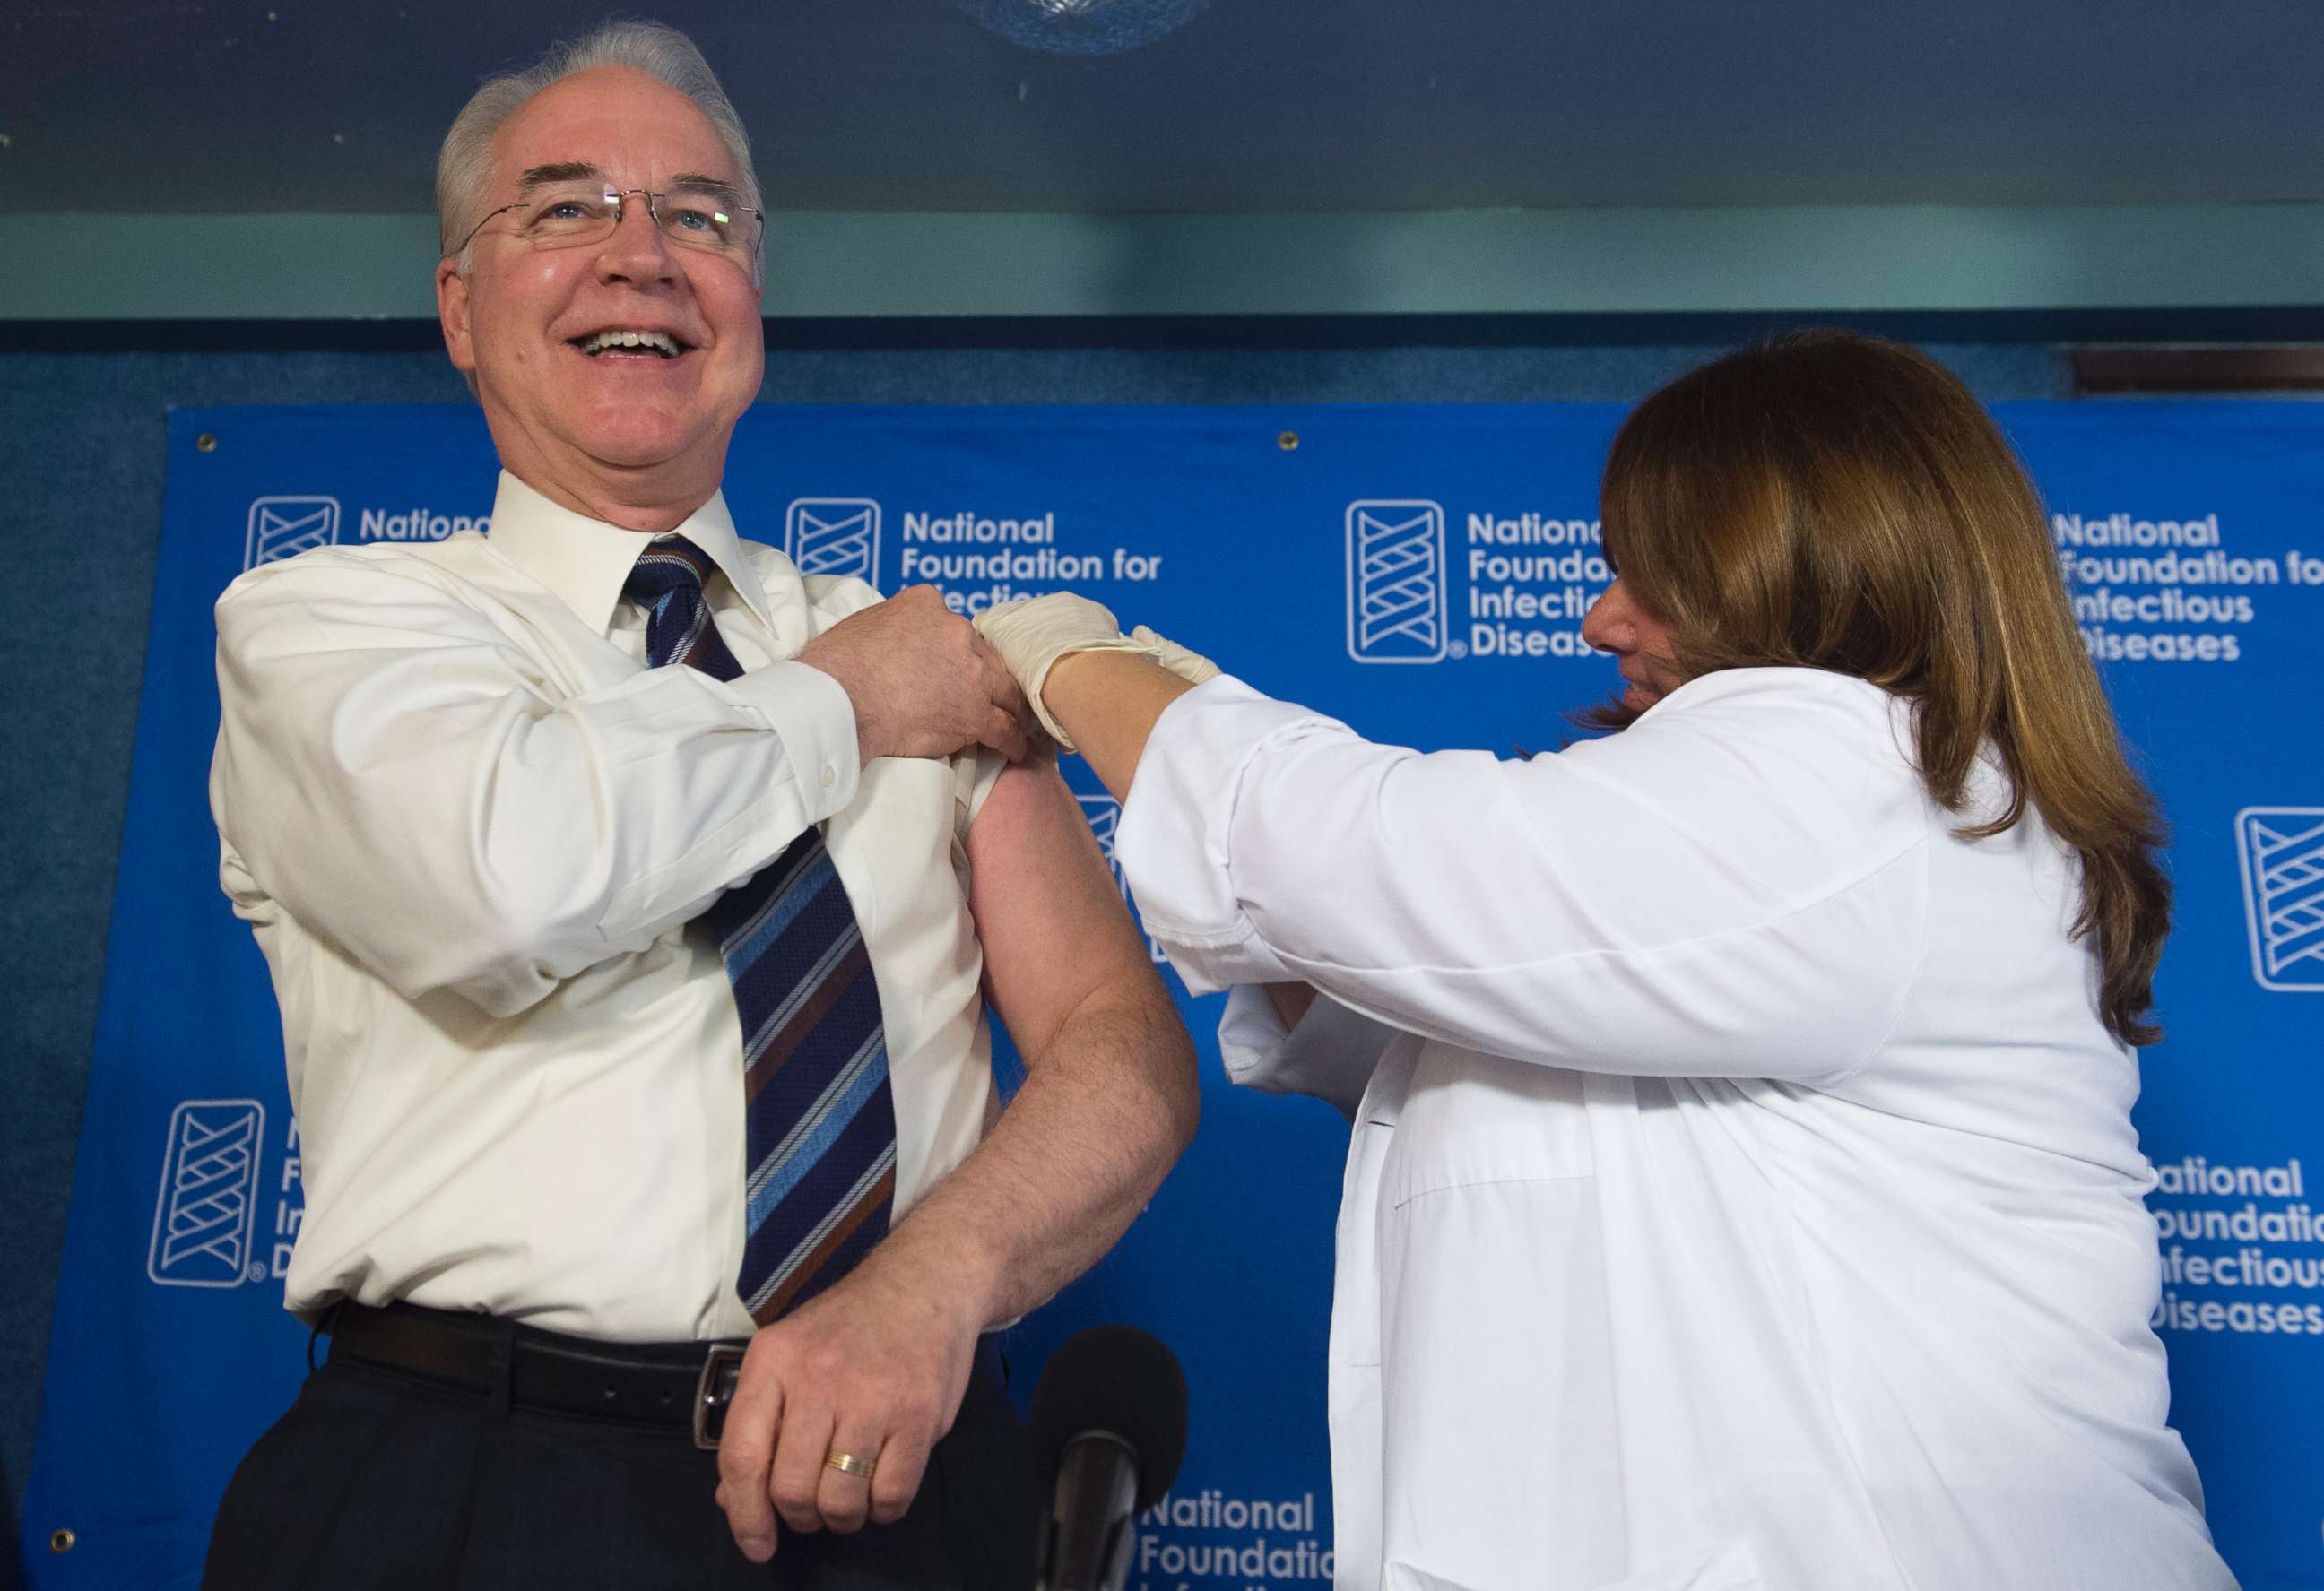 PHOTO: Secretary of Health and Human Services Tom Price attends a press conference about influenza prevention for the upcoming flu season at the National Press Club in Washington, Sept. 28, 2017.